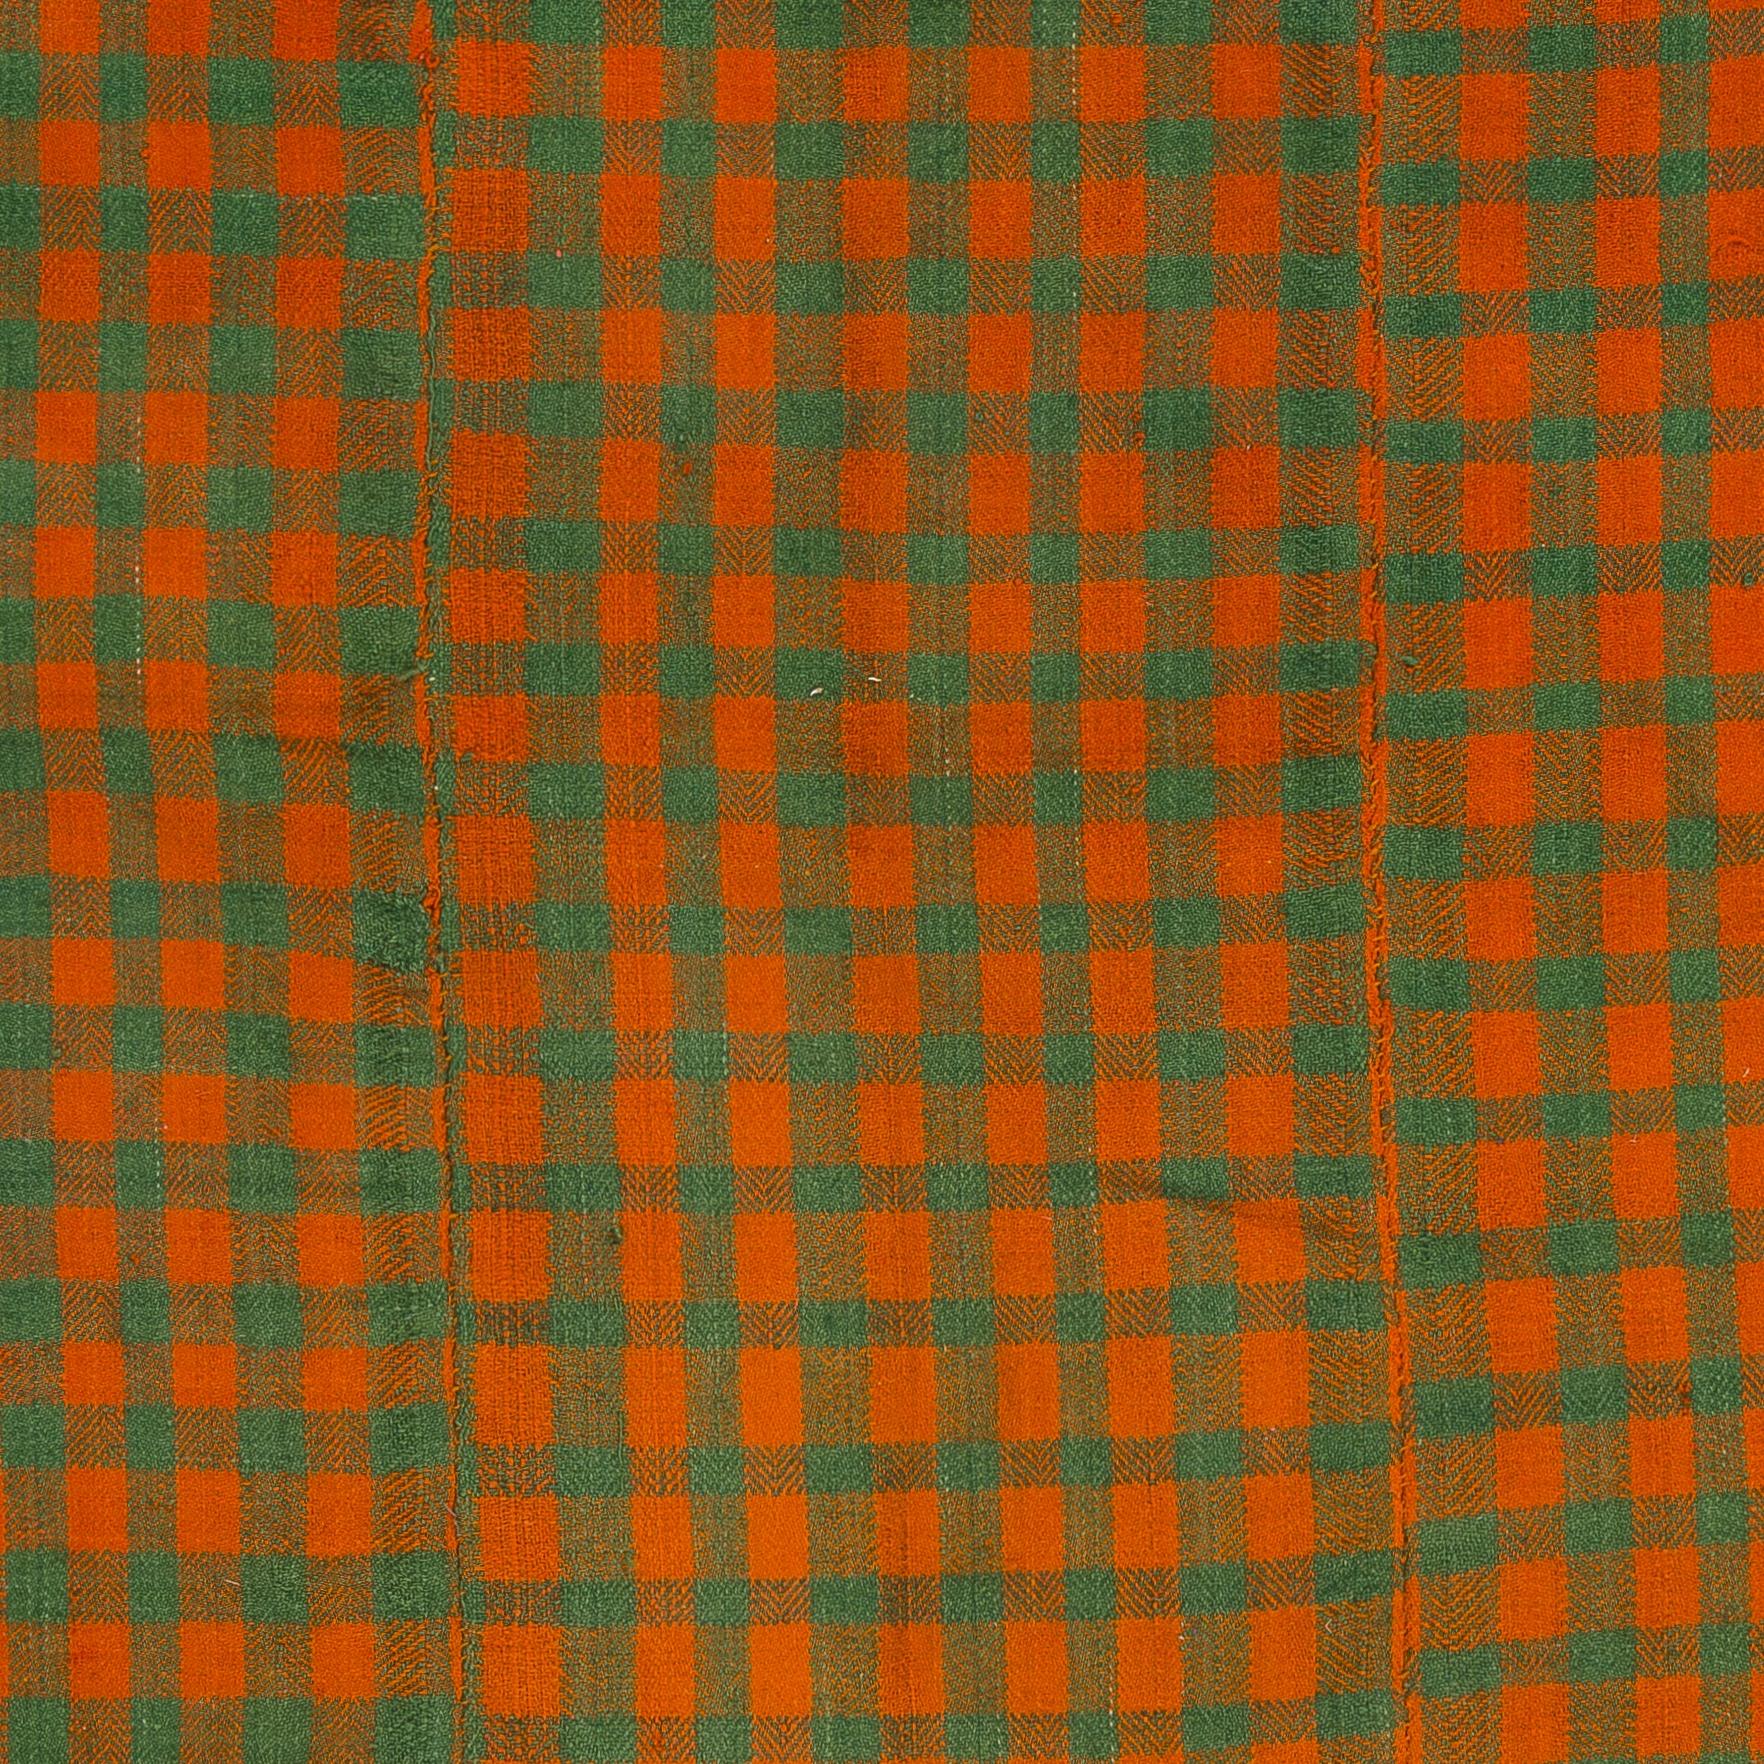 Vintage checkered Turkish flat-weave Kilim rug in orange and citrus green color.
This beautiful and simple weaving is sturdy and clean, it can be used on the floor as a rug or as a bed cover, sofa throw or wall hanging.

Size: 4.4 x 5 Ft Ft (132 x